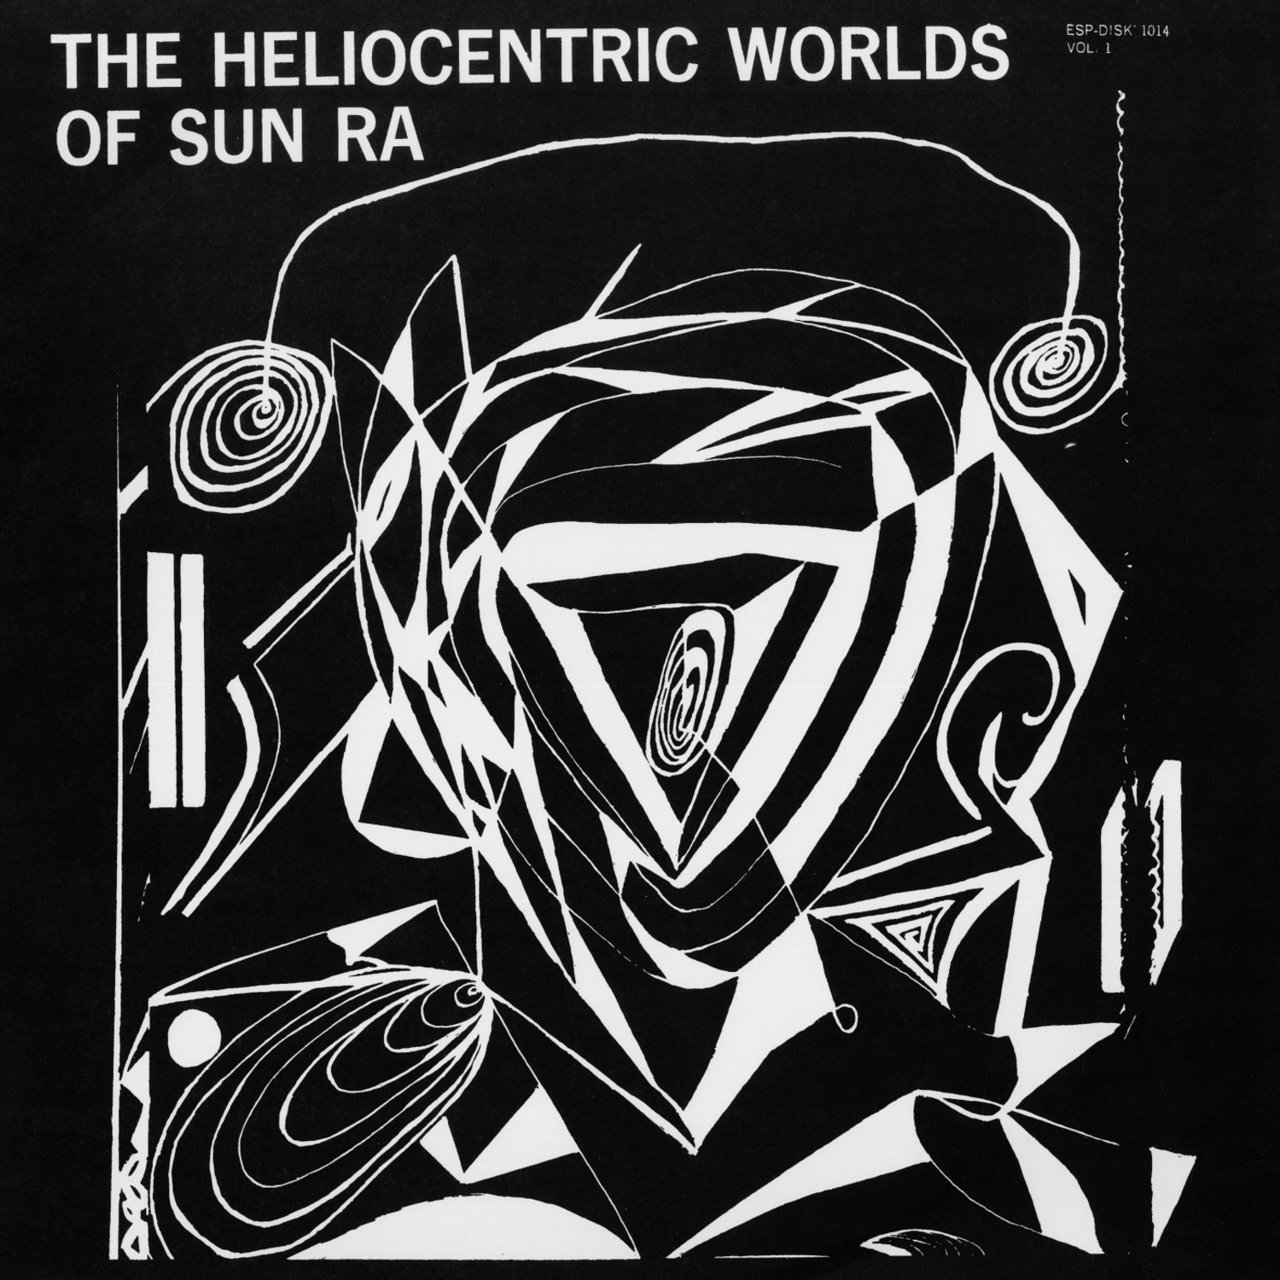 The Heliocentric Worlds of Sun Ra (vol. 1) [1965]